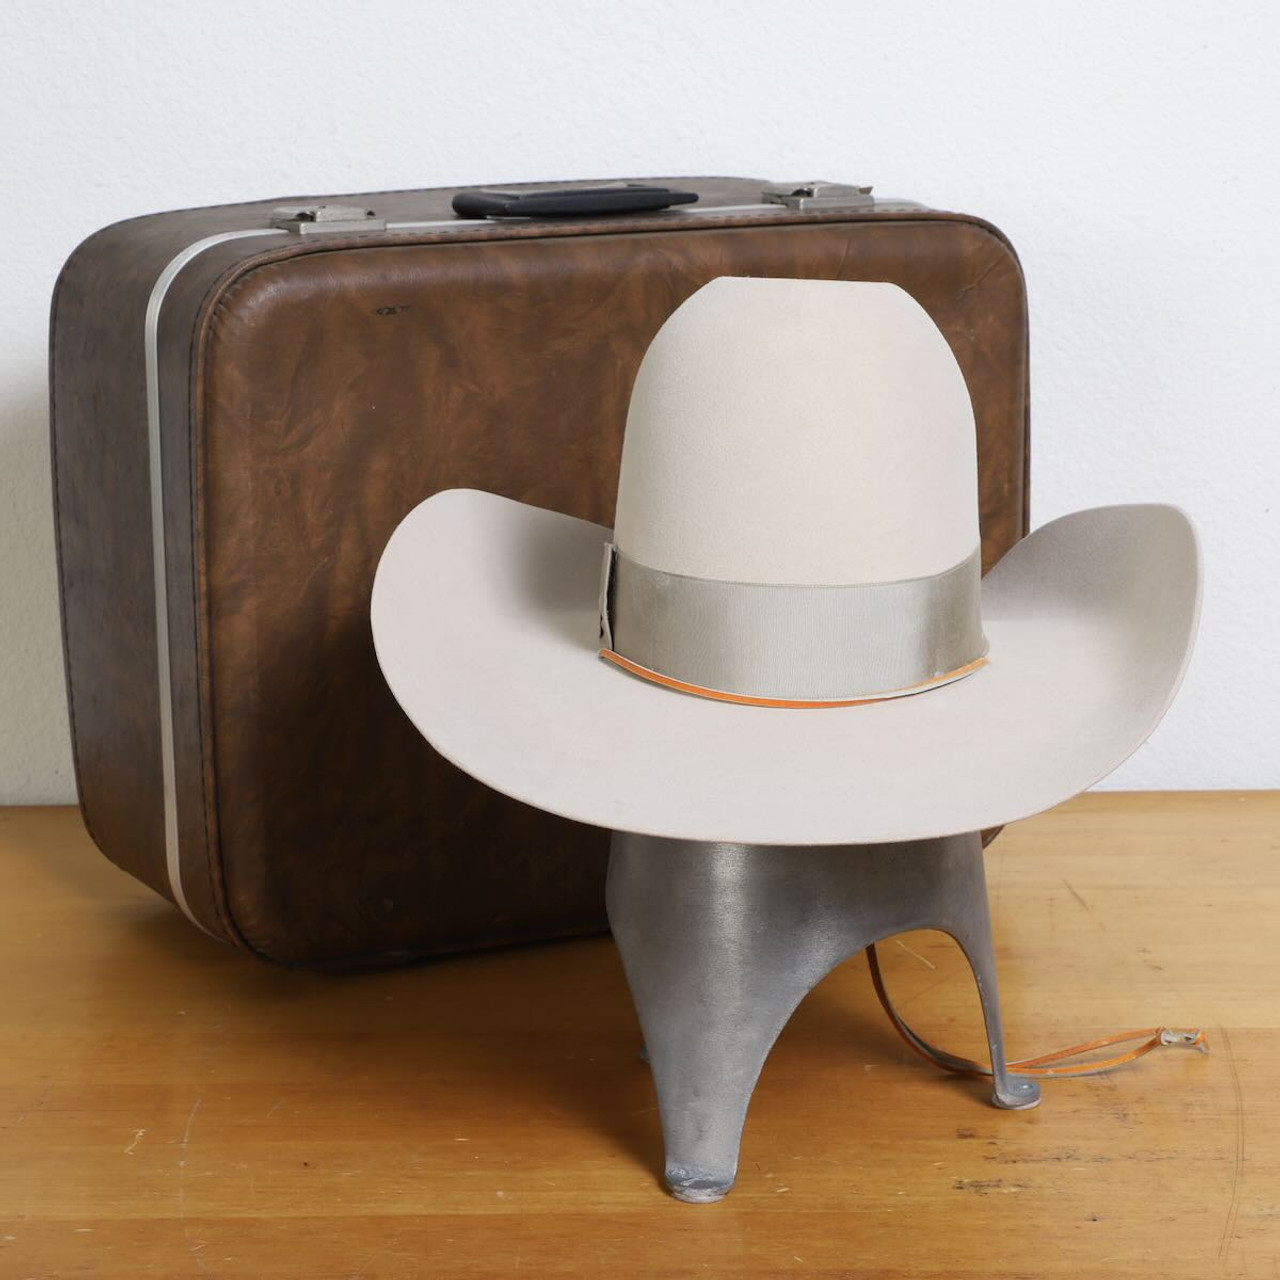 What Does the X Mean in Cowboy Hats? A Brief Explanation – Cowboy Ace